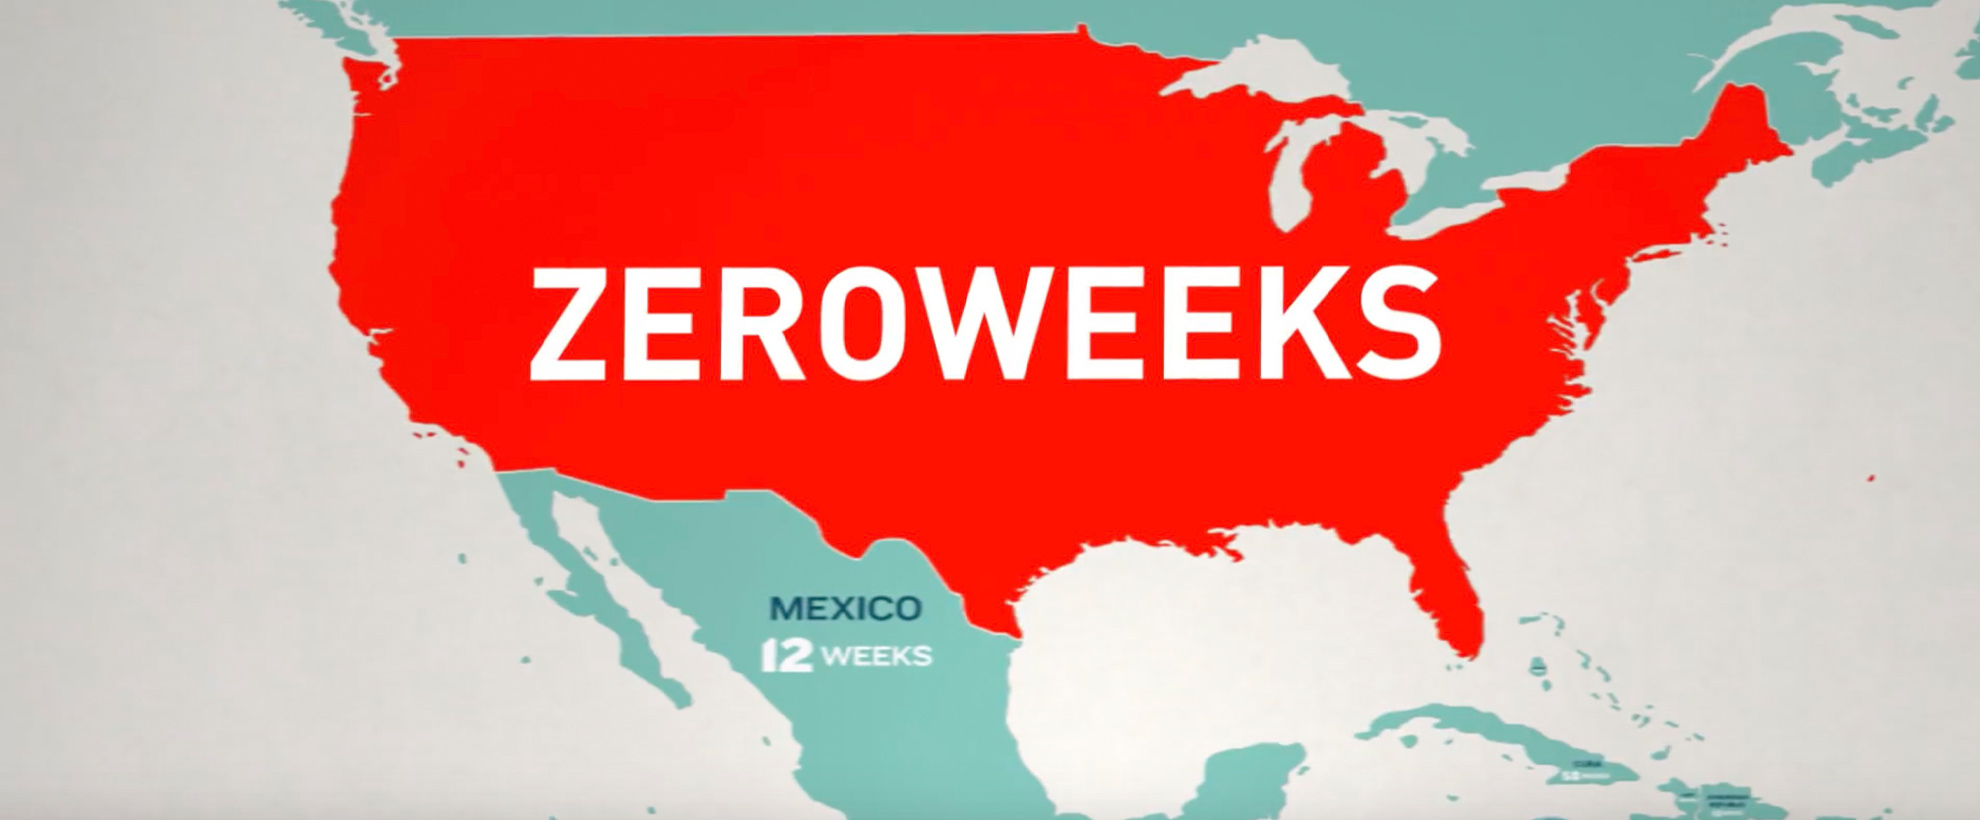 A map of the United States, North America is coloured red with 'ZERO WEEKS' across it in white text